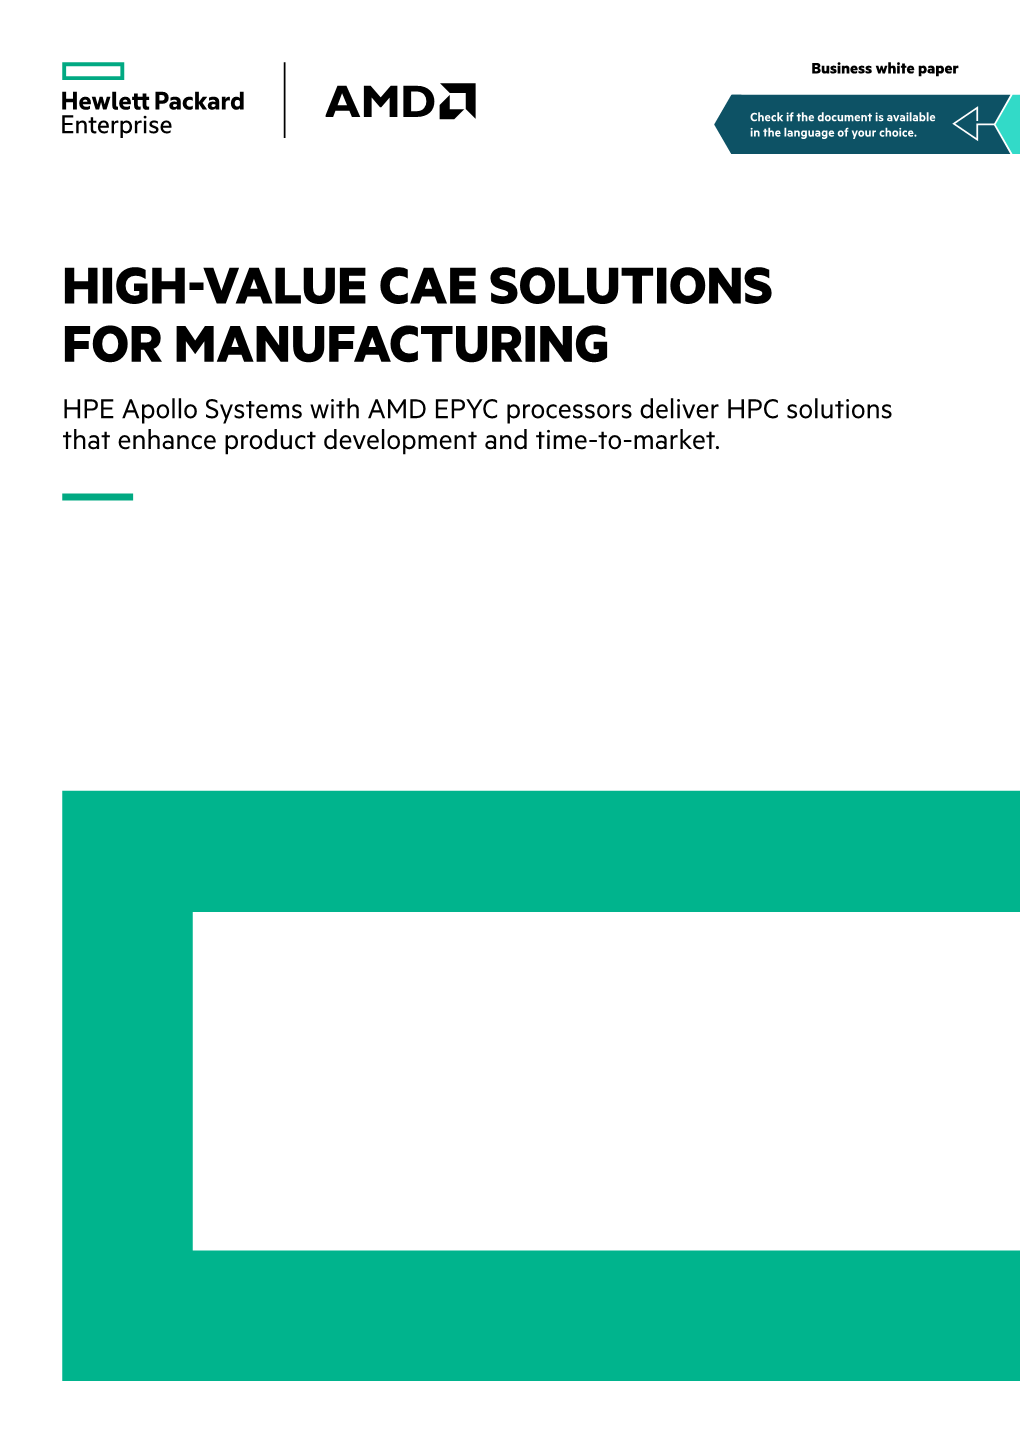 High-Value CAE Solutions for Manufacturing Business